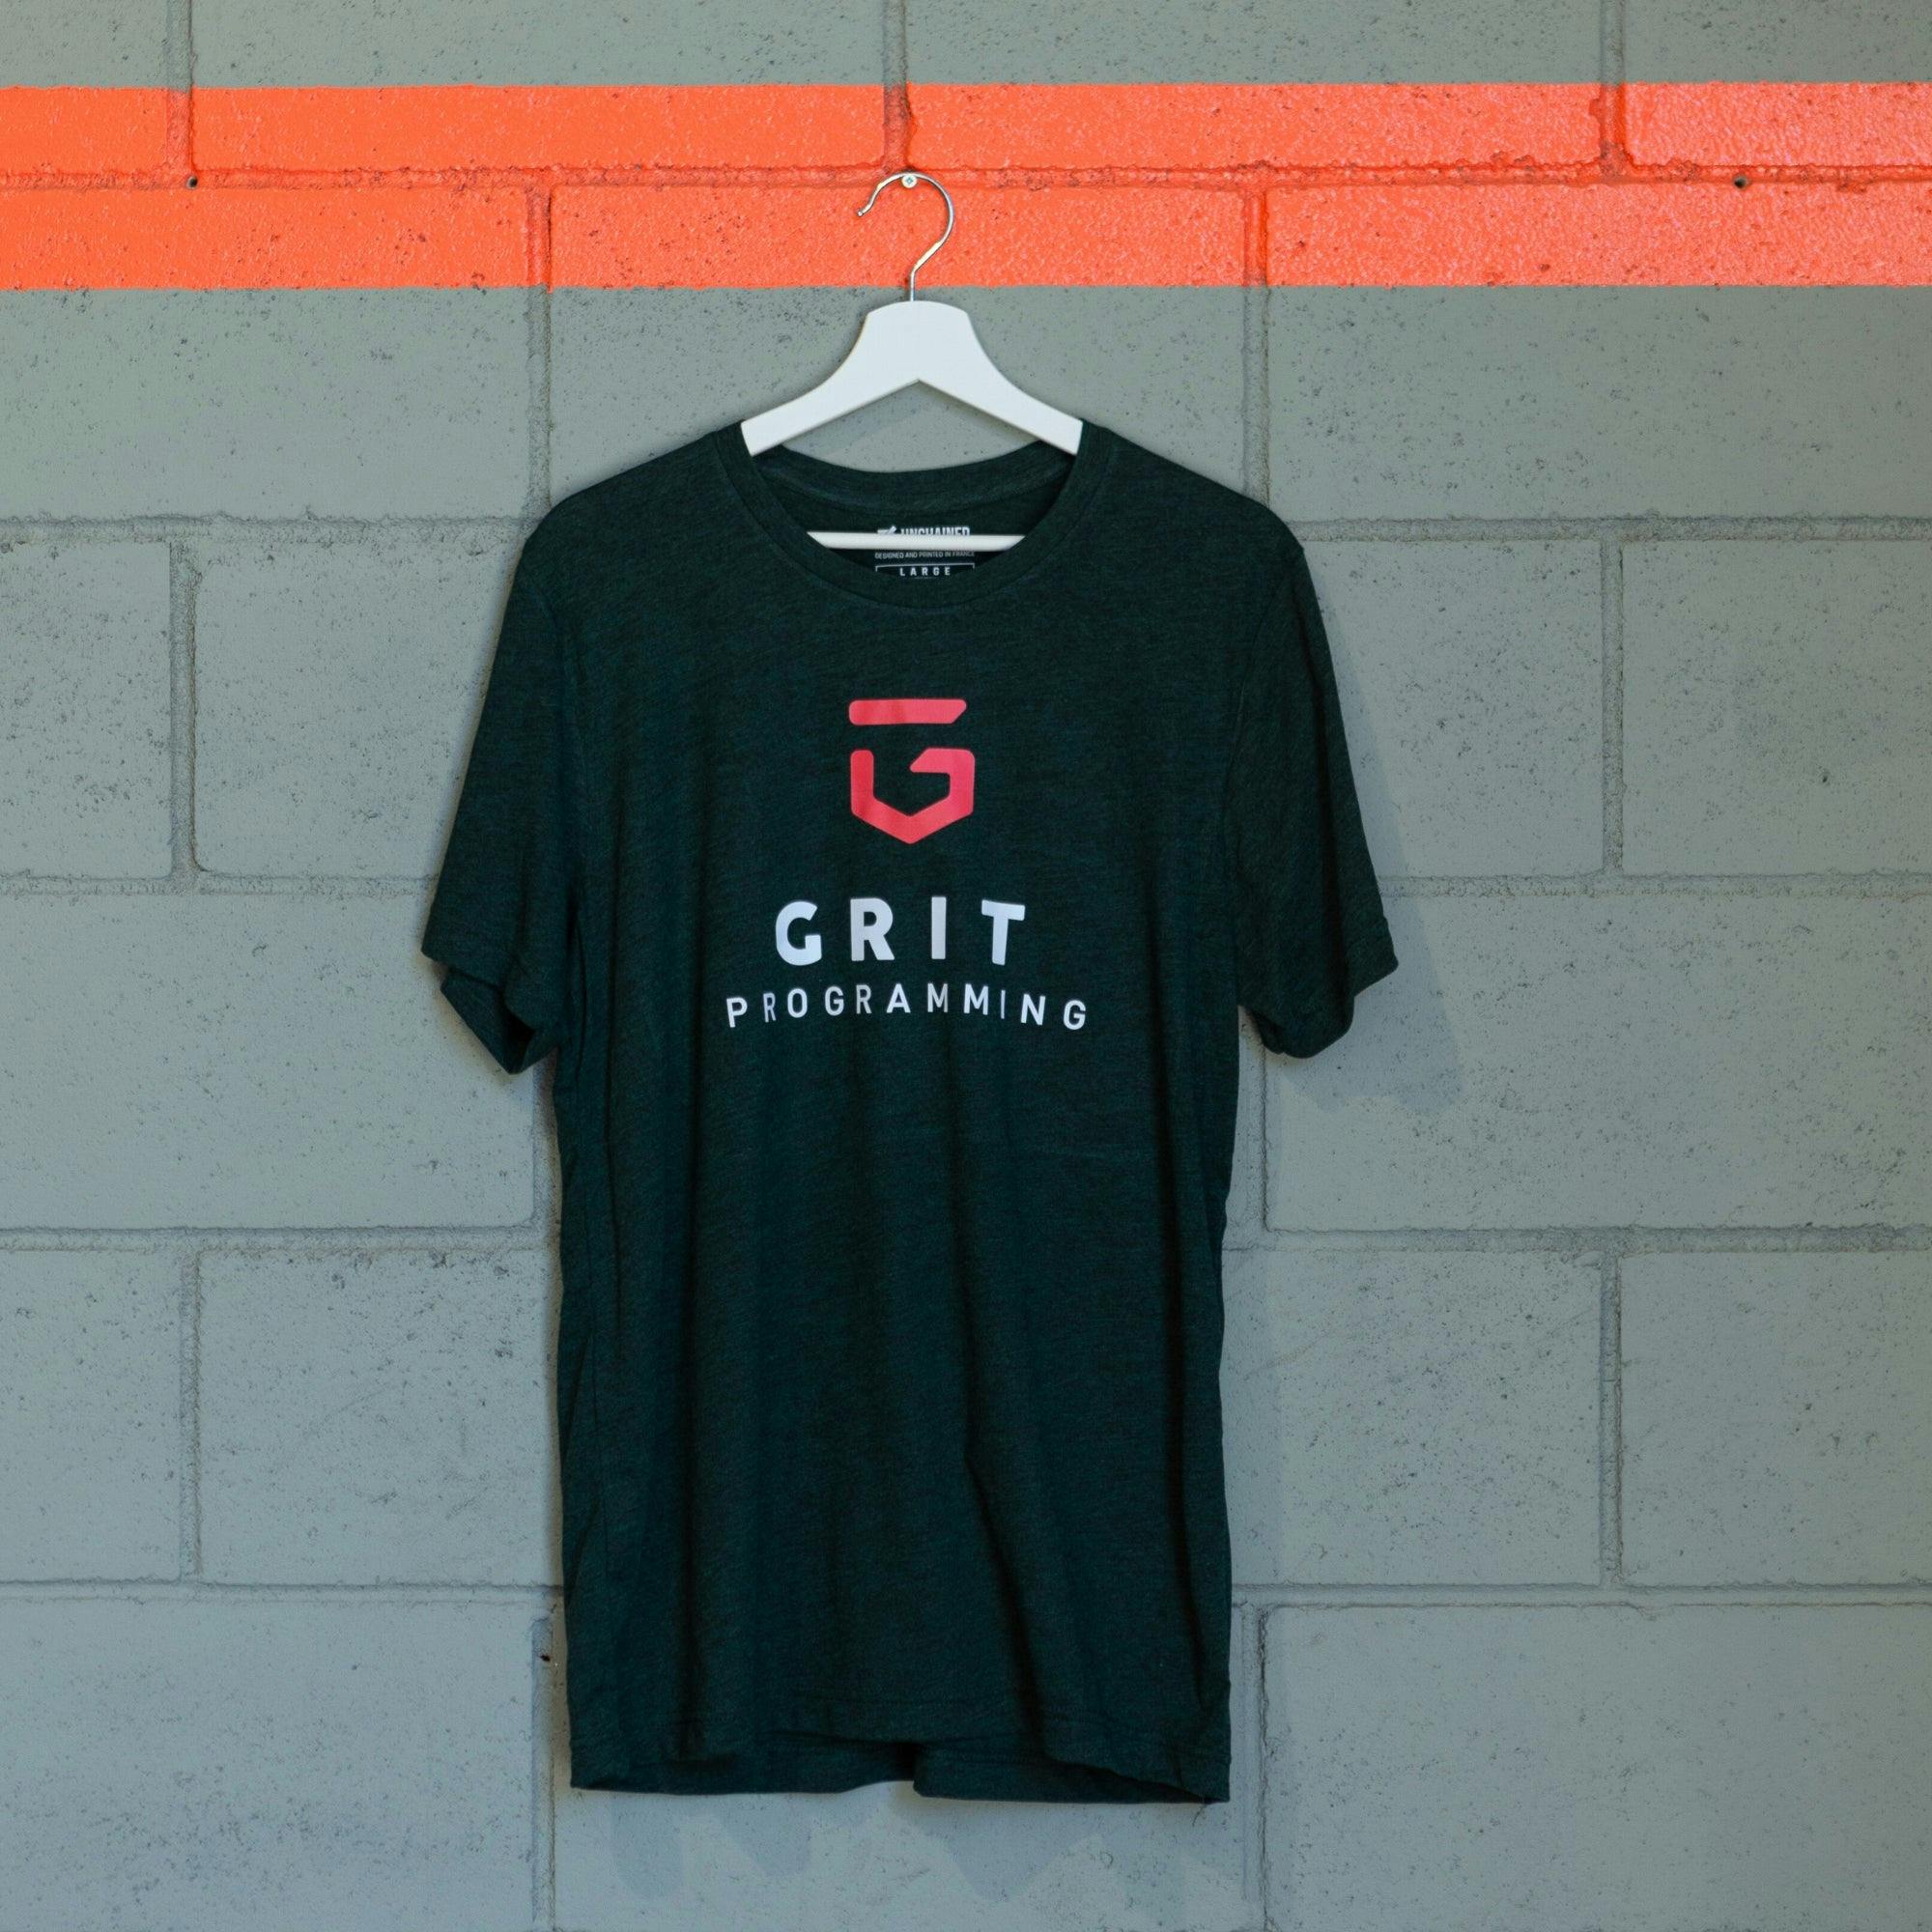 Camiseta GRIT Programming verde oscura by unchained